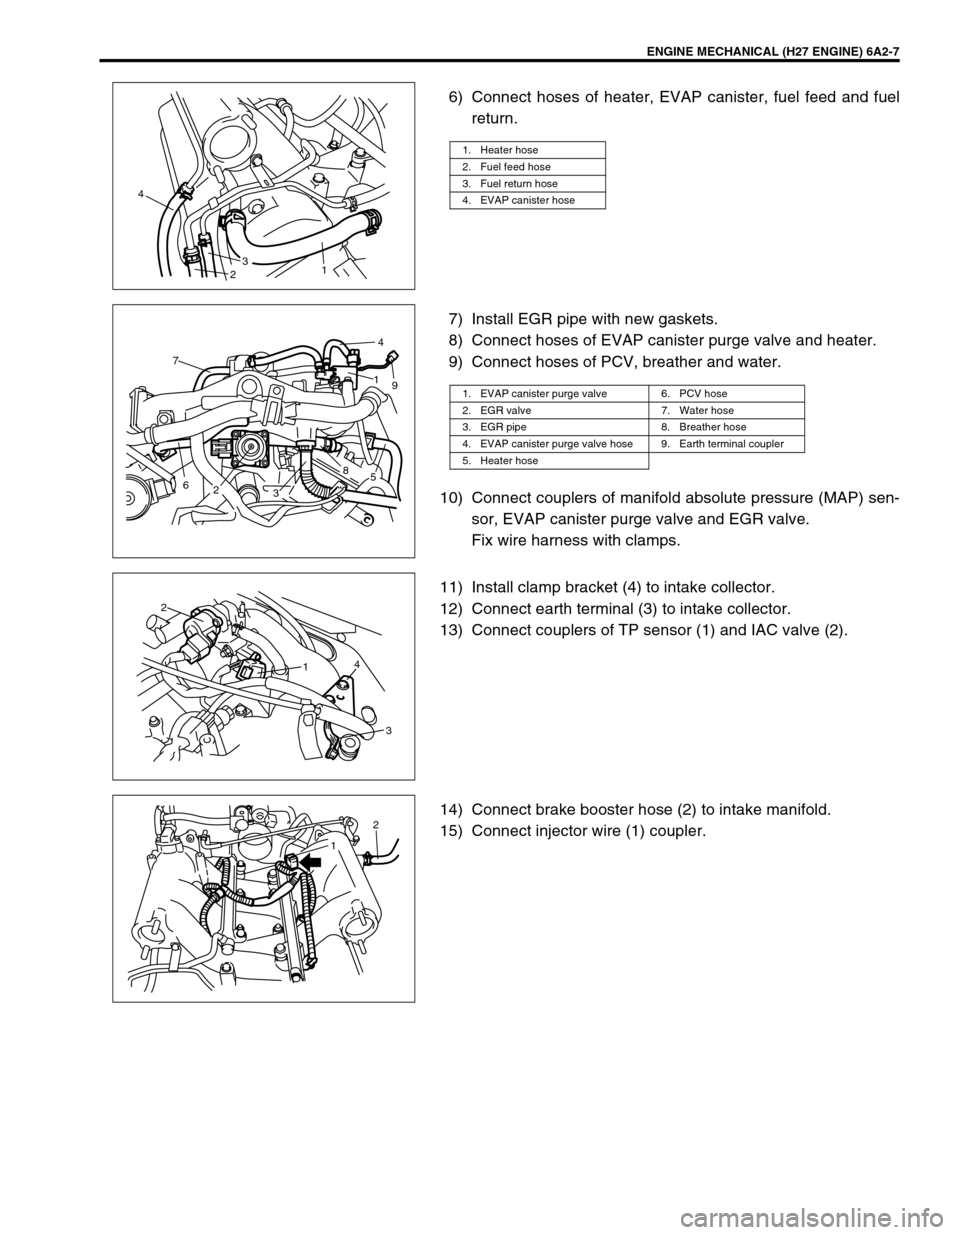 SUZUKI GRAND VITARA 1999 2.G Owners Manual ENGINE MECHANICAL (H27 ENGINE) 6A2-7
6) Connect hoses of heater, EVAP canister, fuel feed and fuel
return.
7) Install EGR pipe with new gaskets.
8) Connect hoses of EVAP canister purge valve and heate